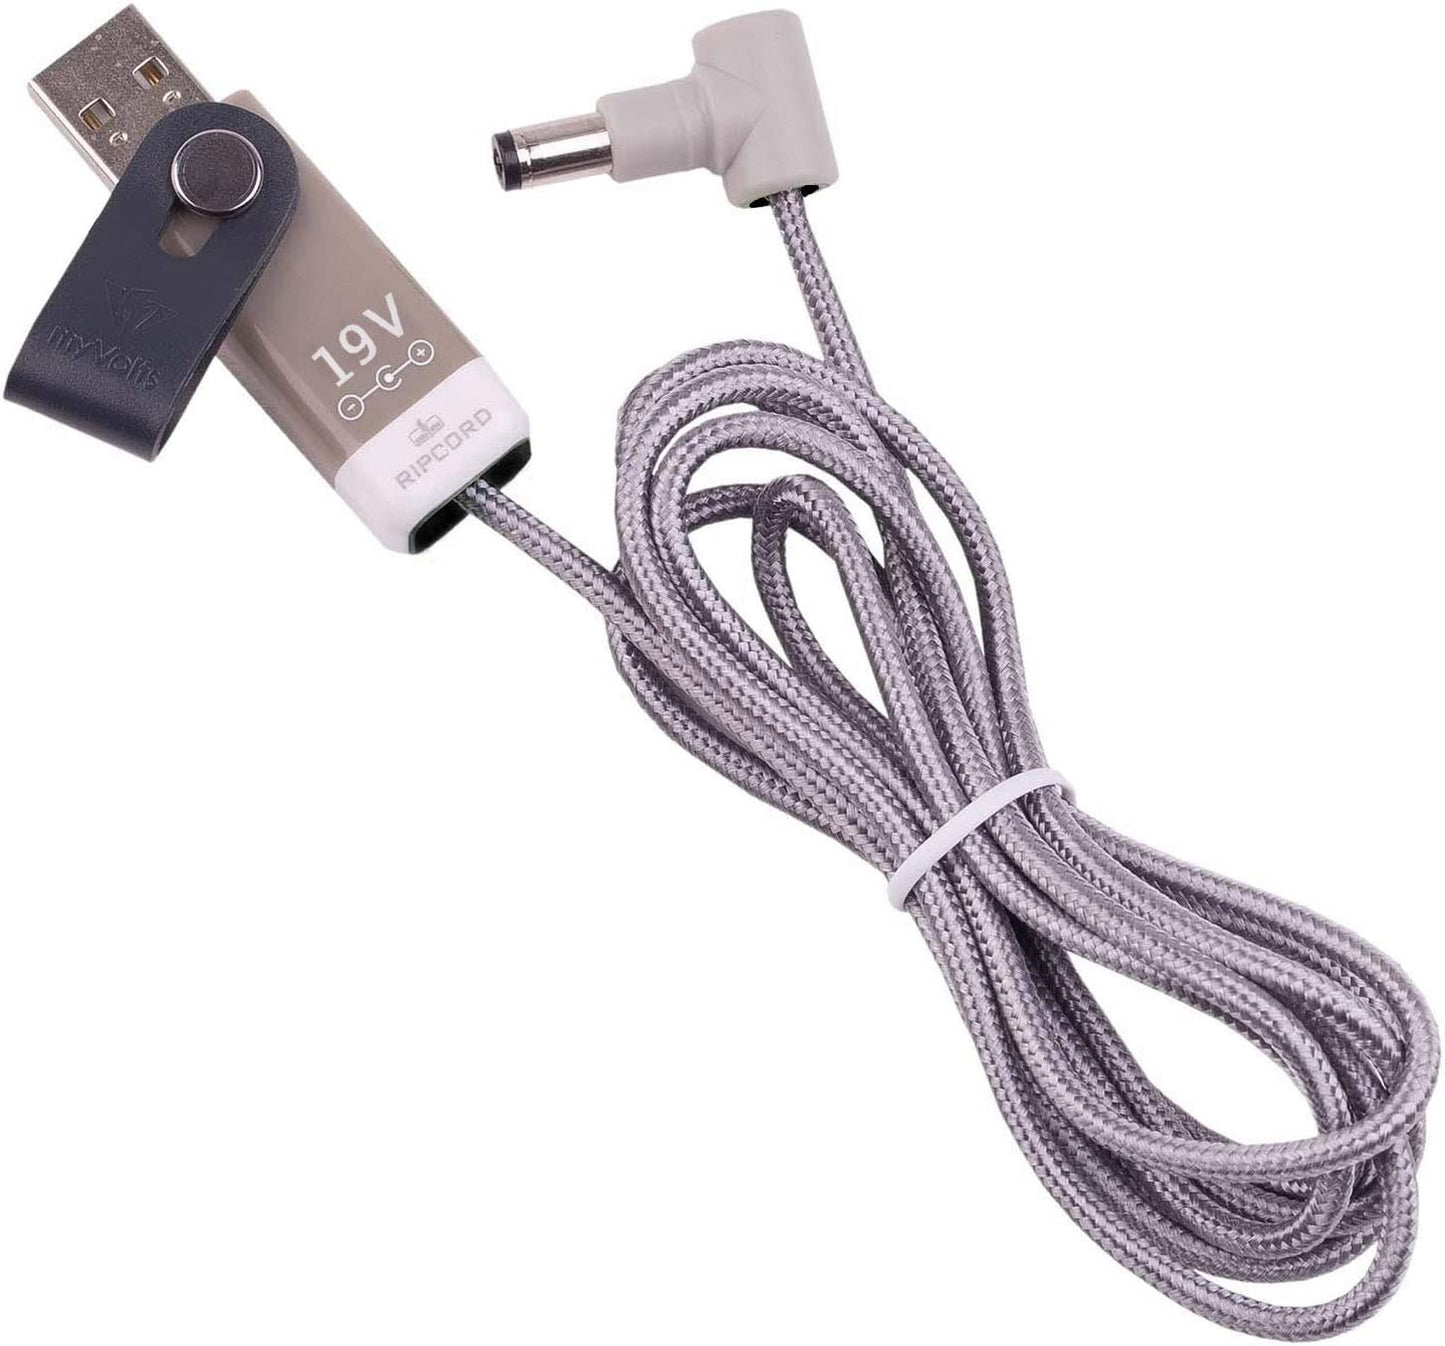 Ripcord 19V USB to DC power cable